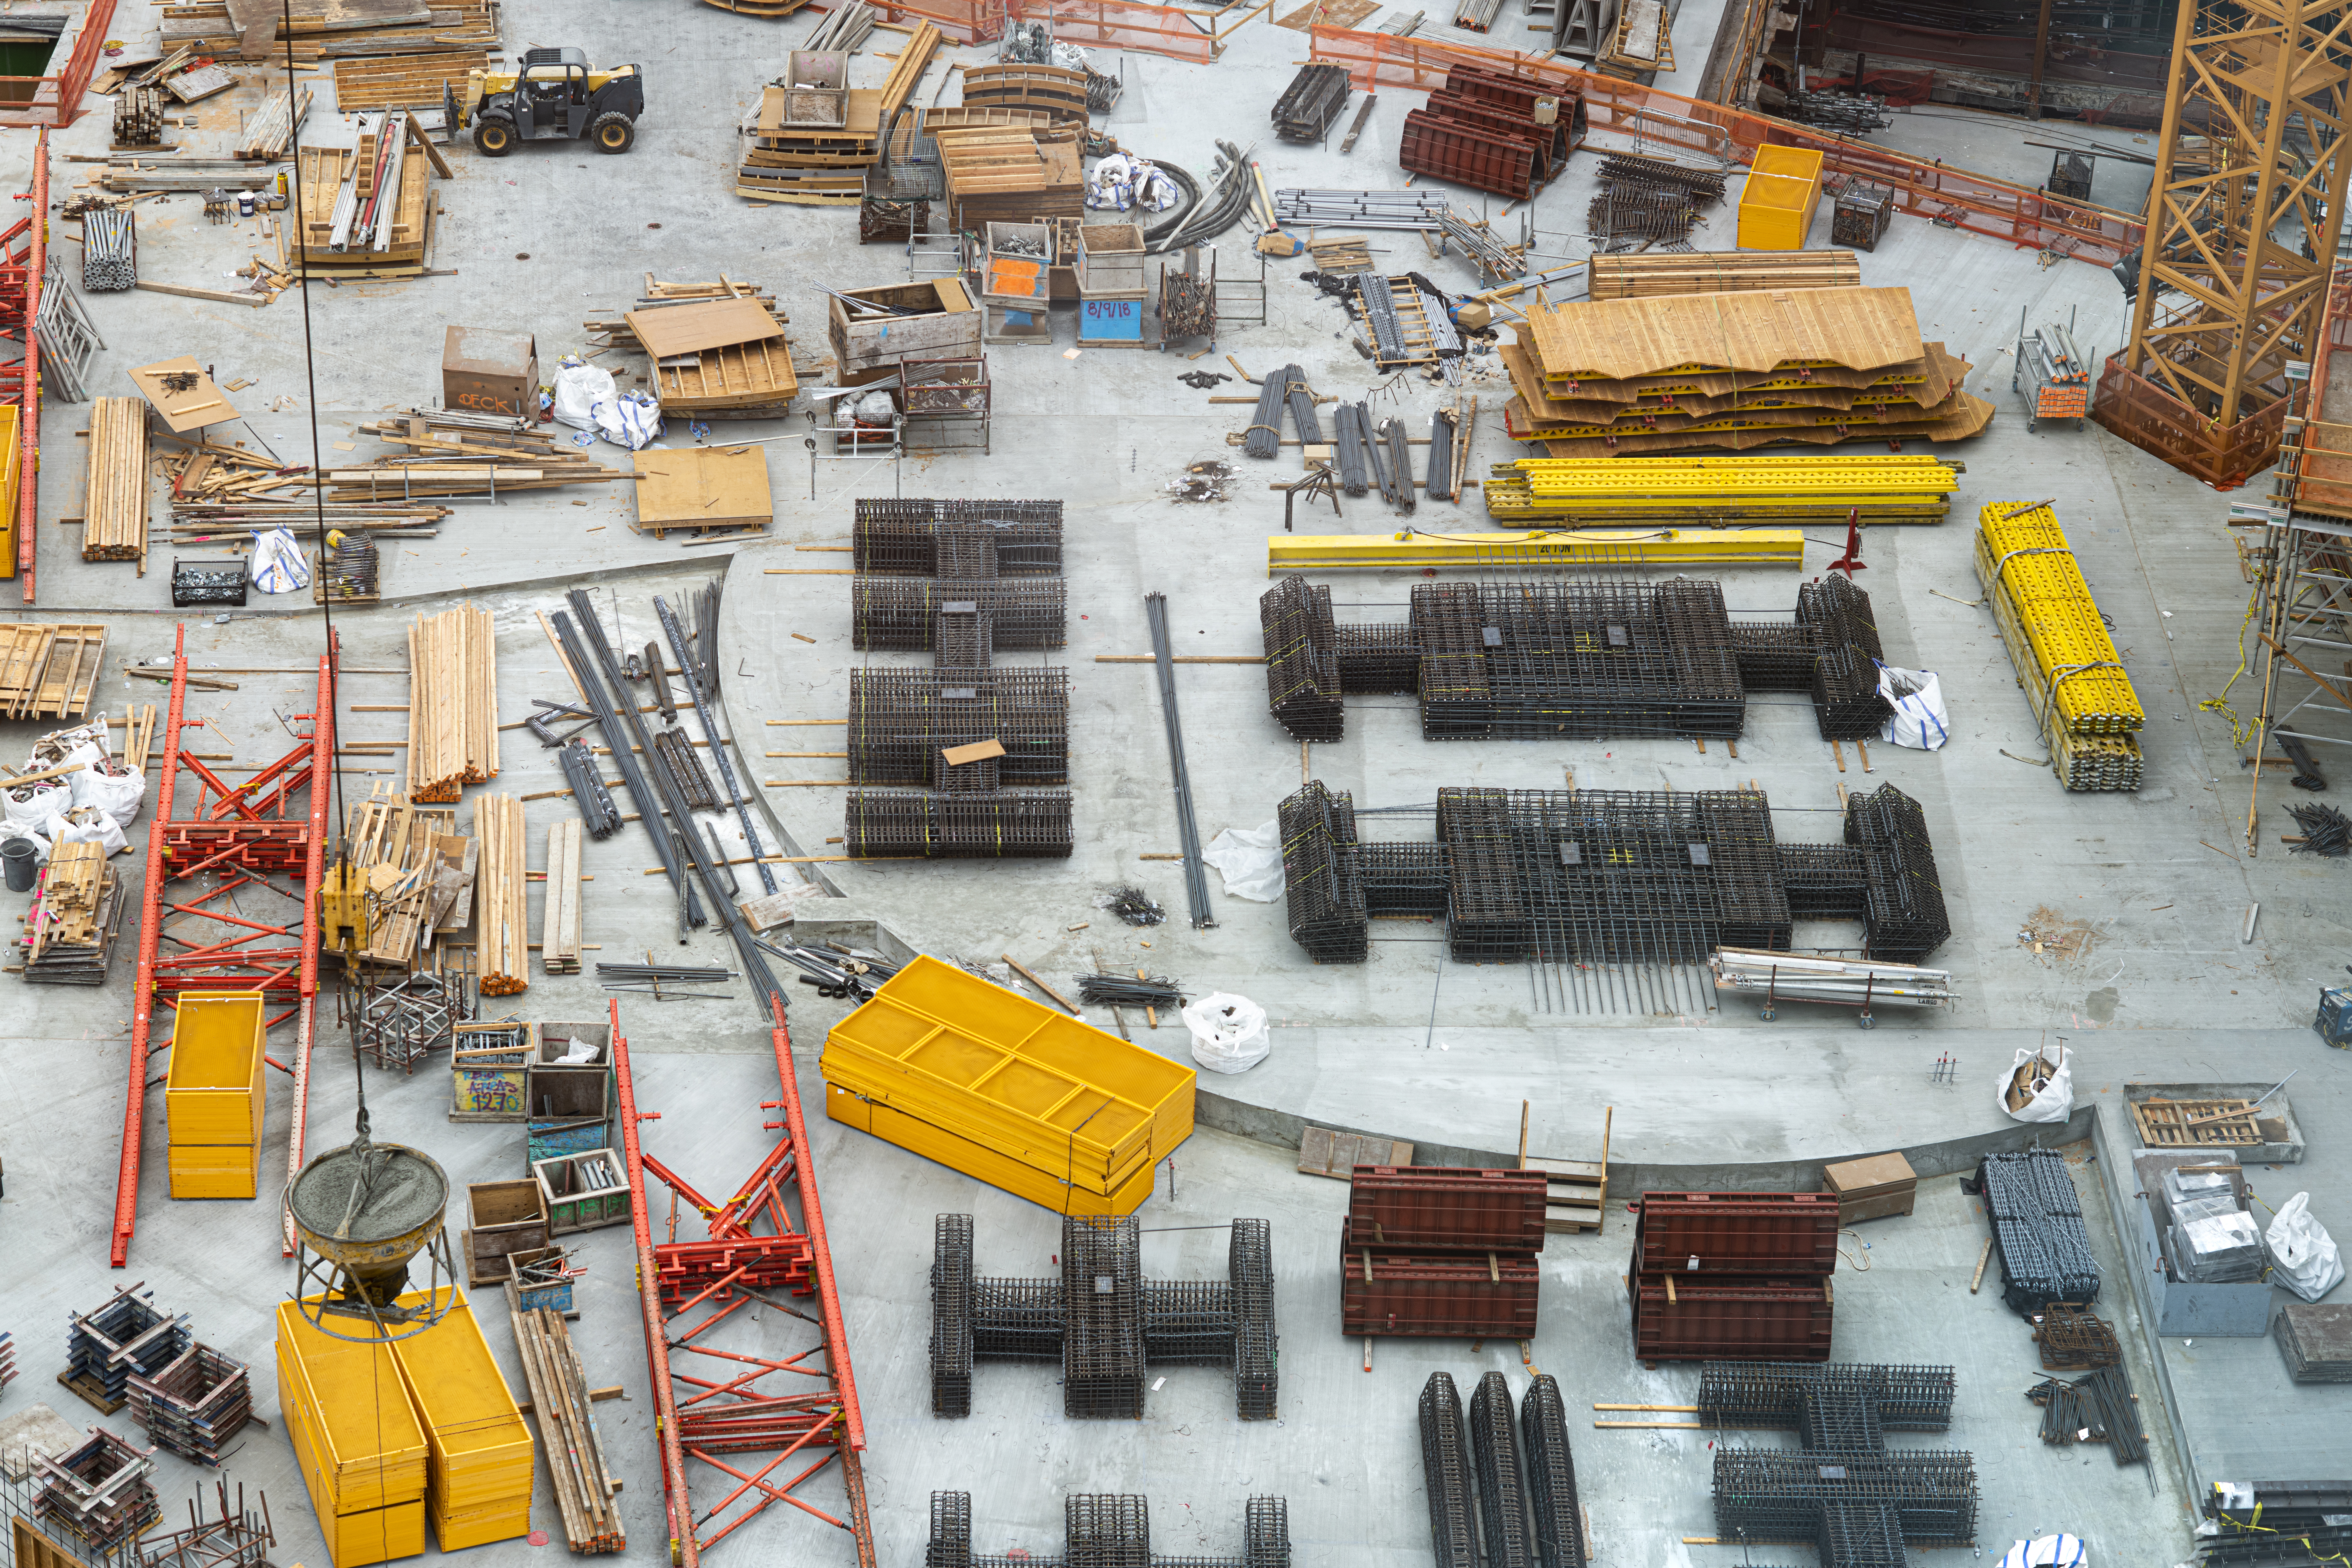 A wide array of construction materials, including wood and steel, are laid out on the ground of a worksite.